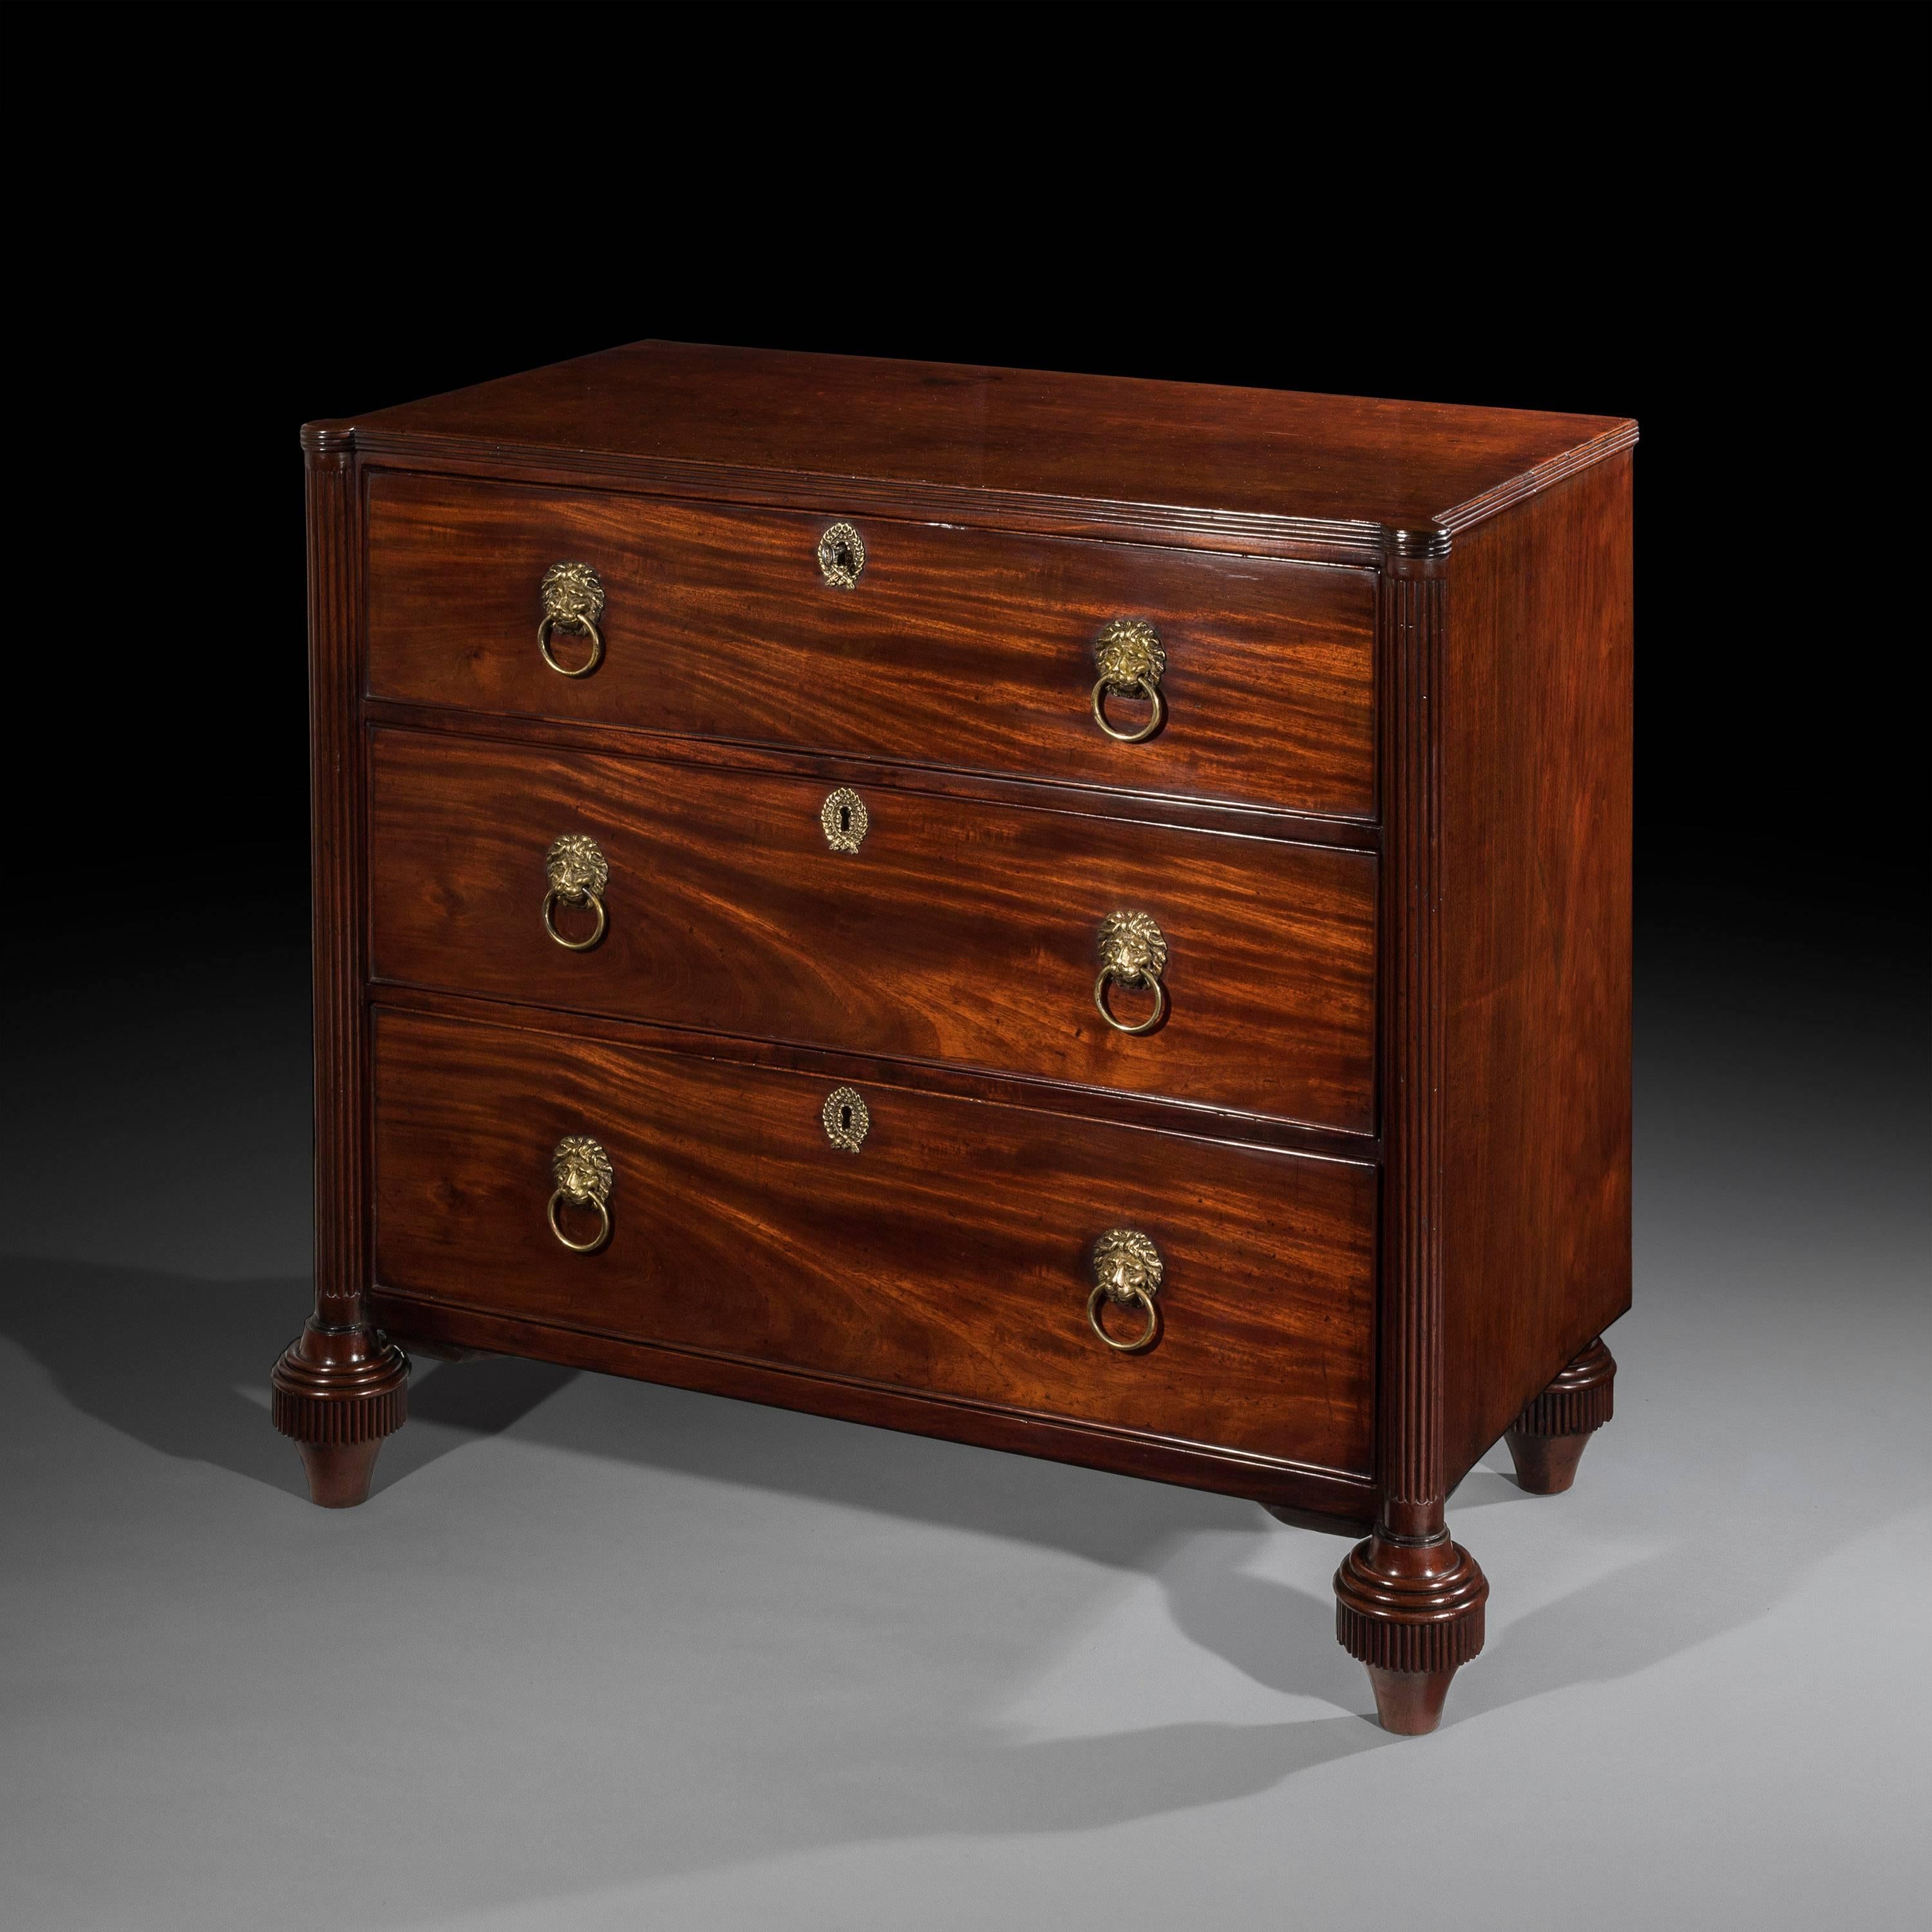 An unusual and rare late 18th century George III period mahogany architectural chest of three drawers in the neoclassical sheraton taste, in the manner of Gillows of Lancaster and London, English, circa 1790.

The rectangular top, with a reeded